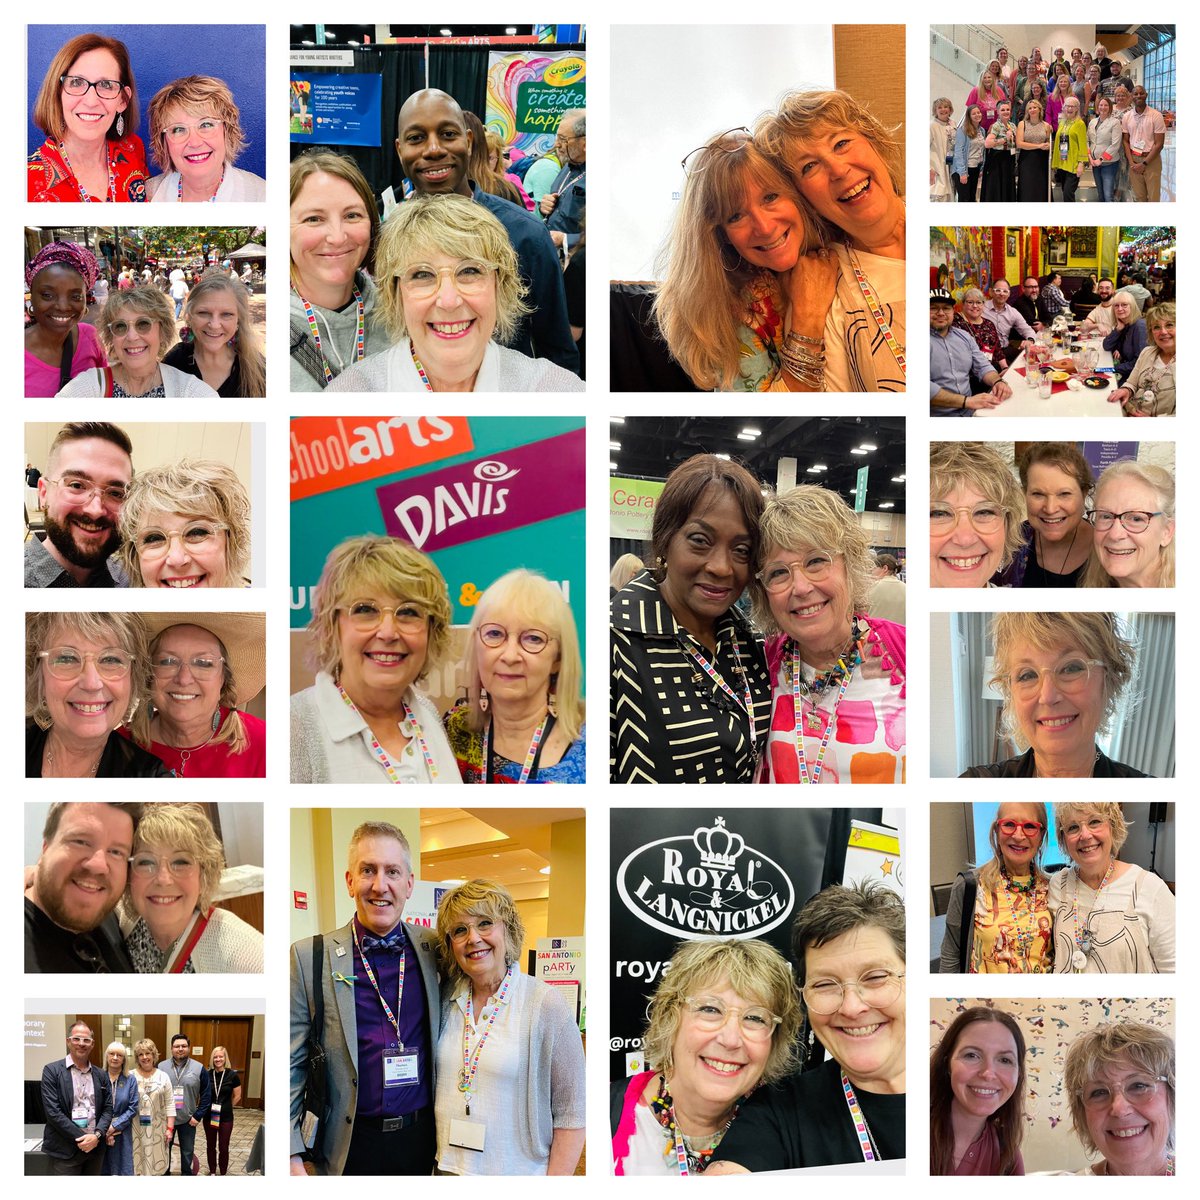 So rejuvenated after attending @NAEA Convention in San Antonio! And that has EVERYTHING to do with who was there and what I learned from them! @SchoolArts @nwalkup @dewestudio @TNarted @TN_Arts @jameswellsedu